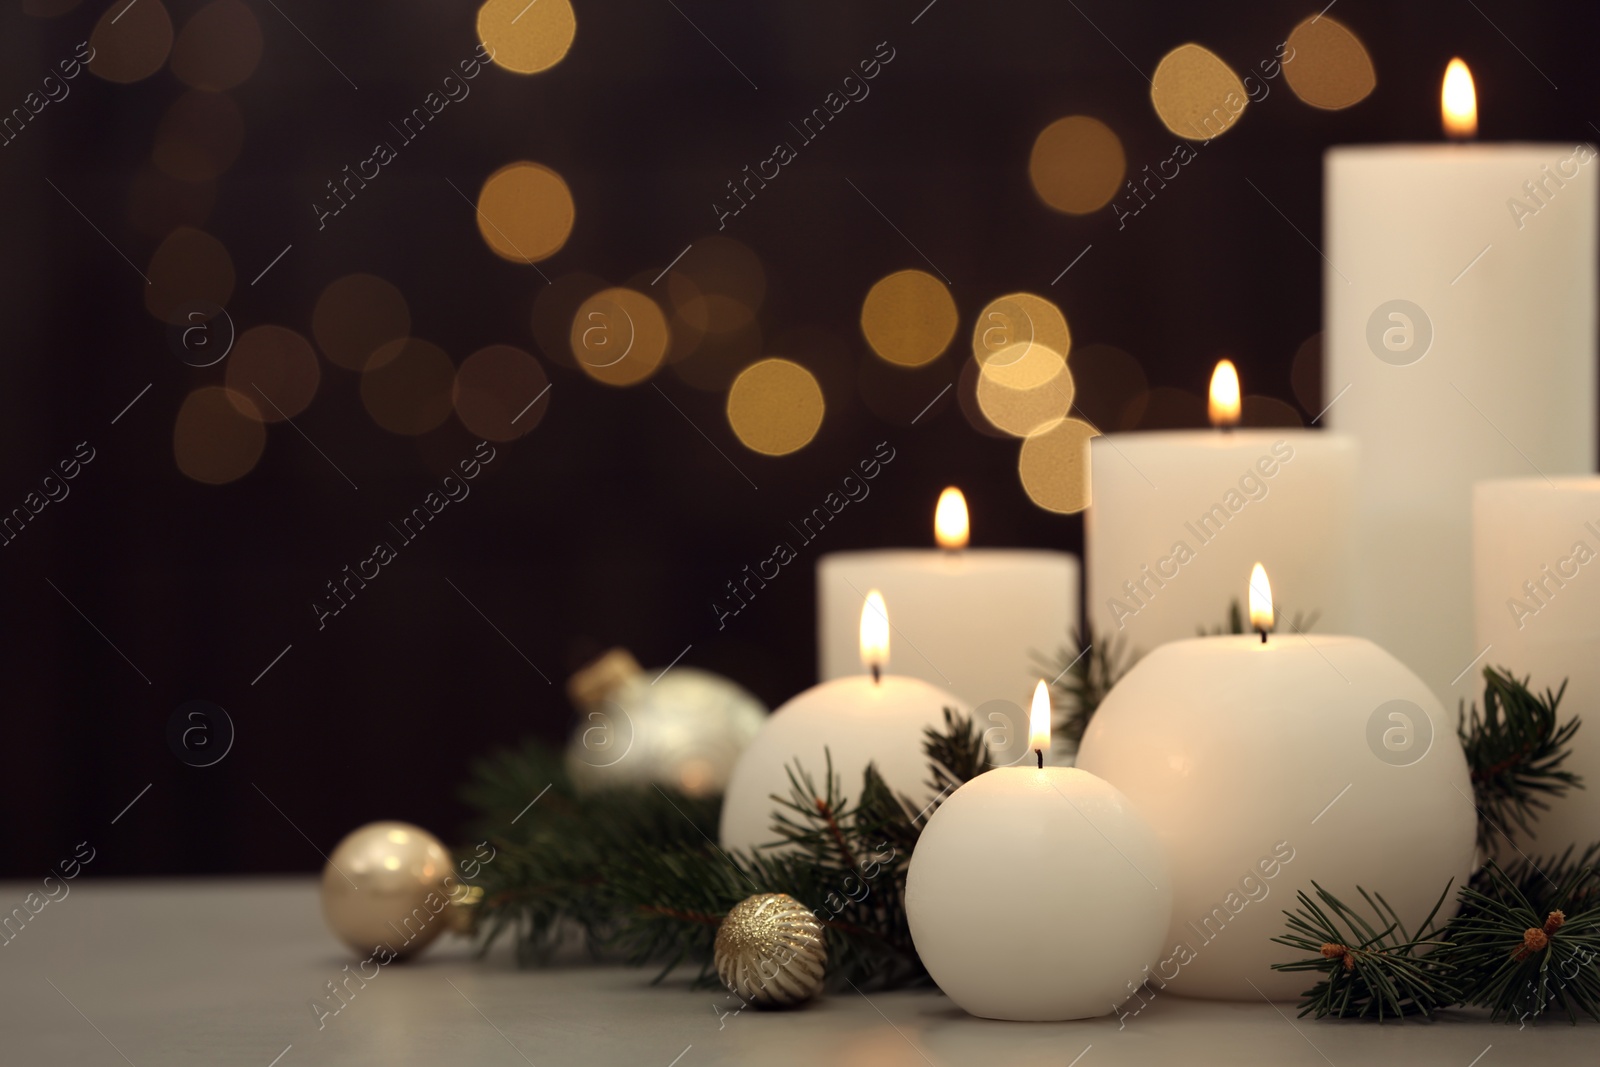 Photo of Burning white candles with Christmas decor on table against blurred lights. Space for text